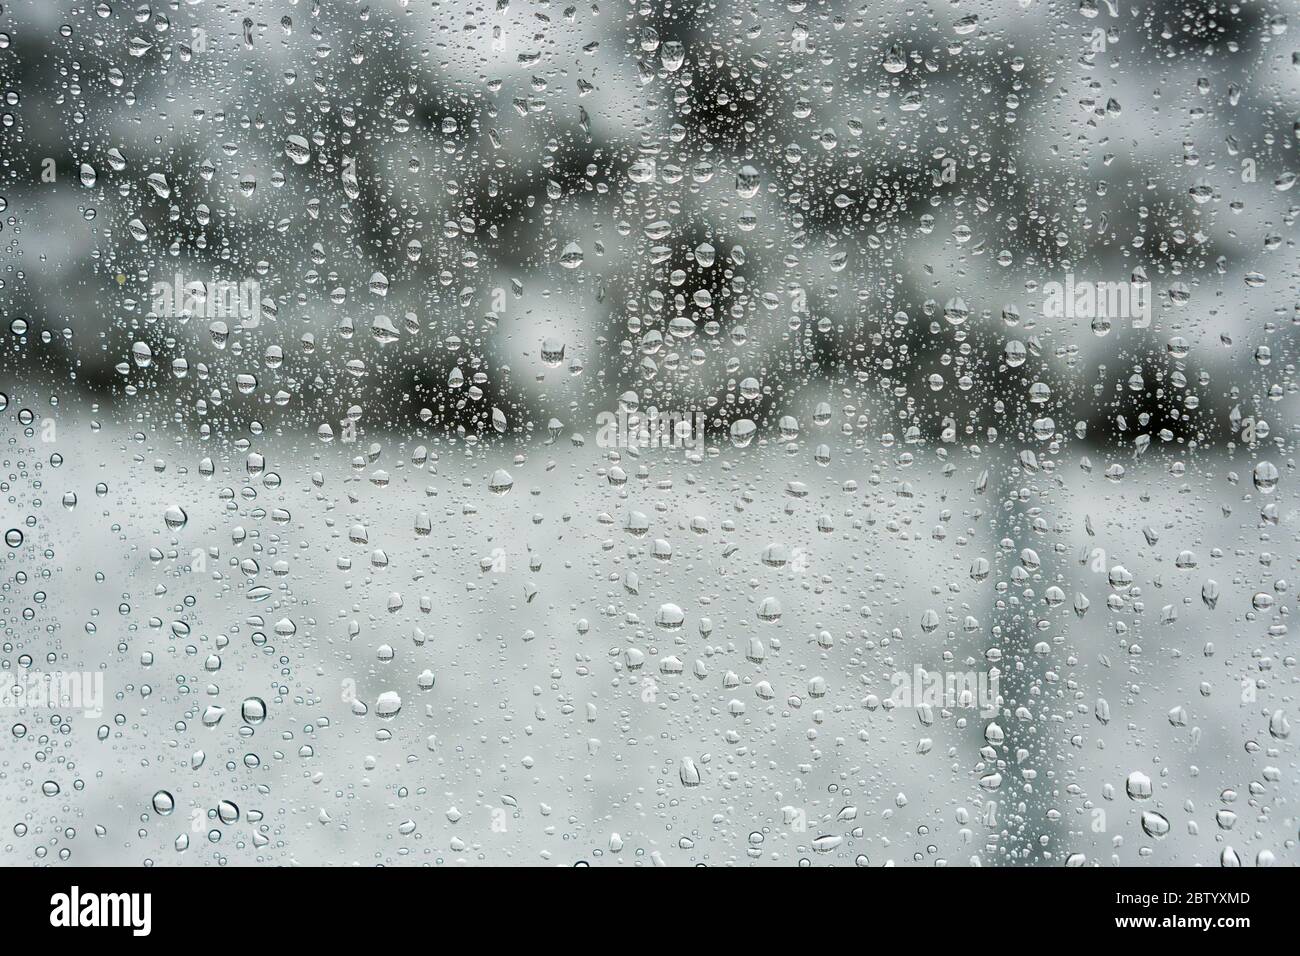 Water drops on a window pane in winter in Lower Bavaria Germany Stock Photo